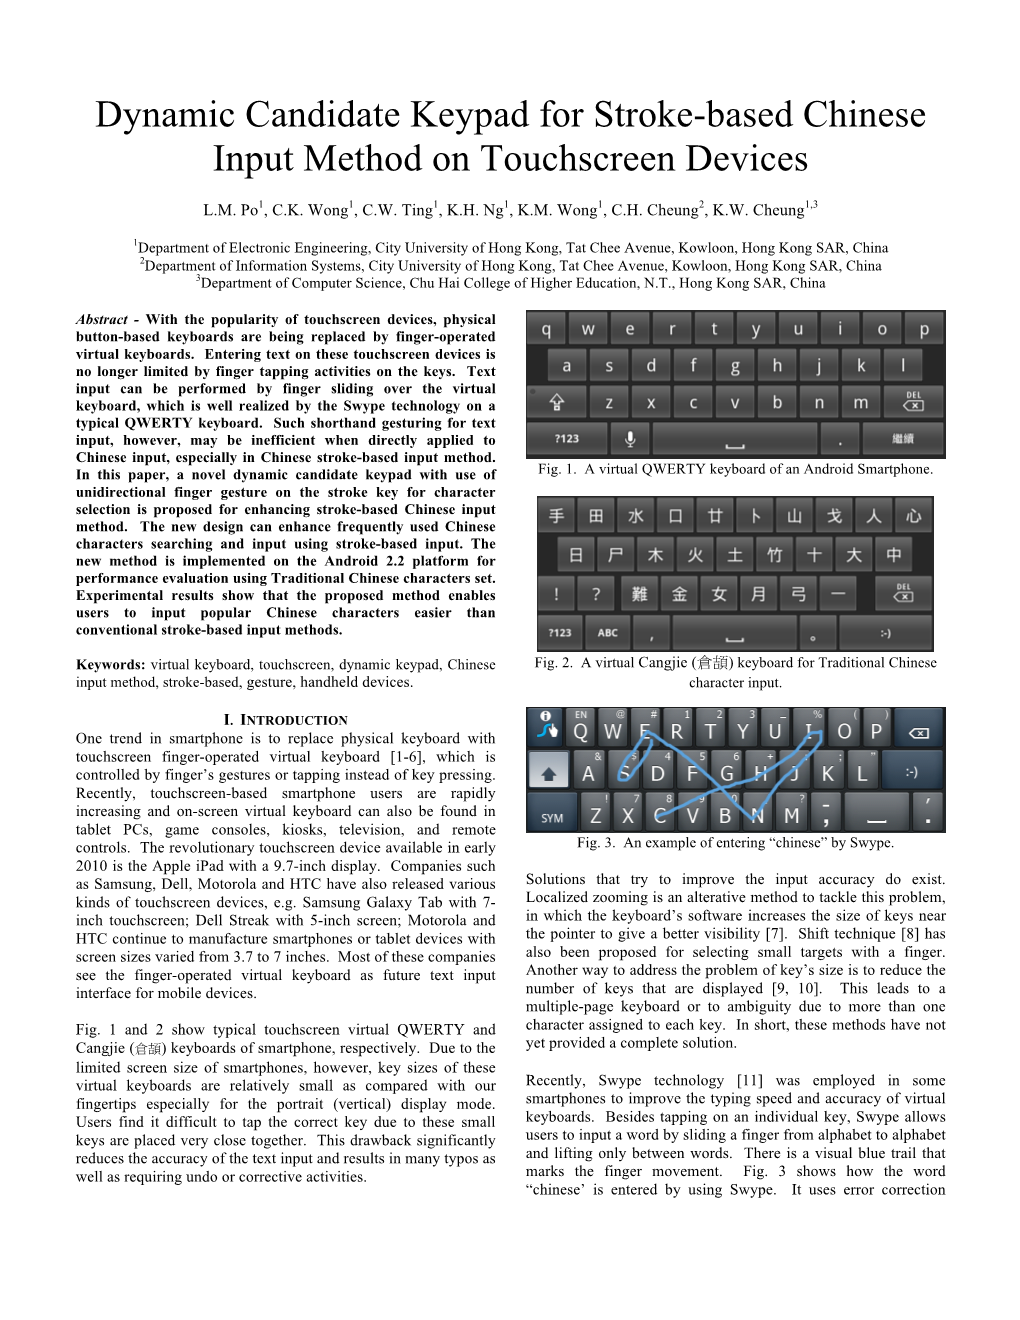 Dynamic Candidate Keypad for Stroke-Based Chinese Input Method on Touchscreen Devices